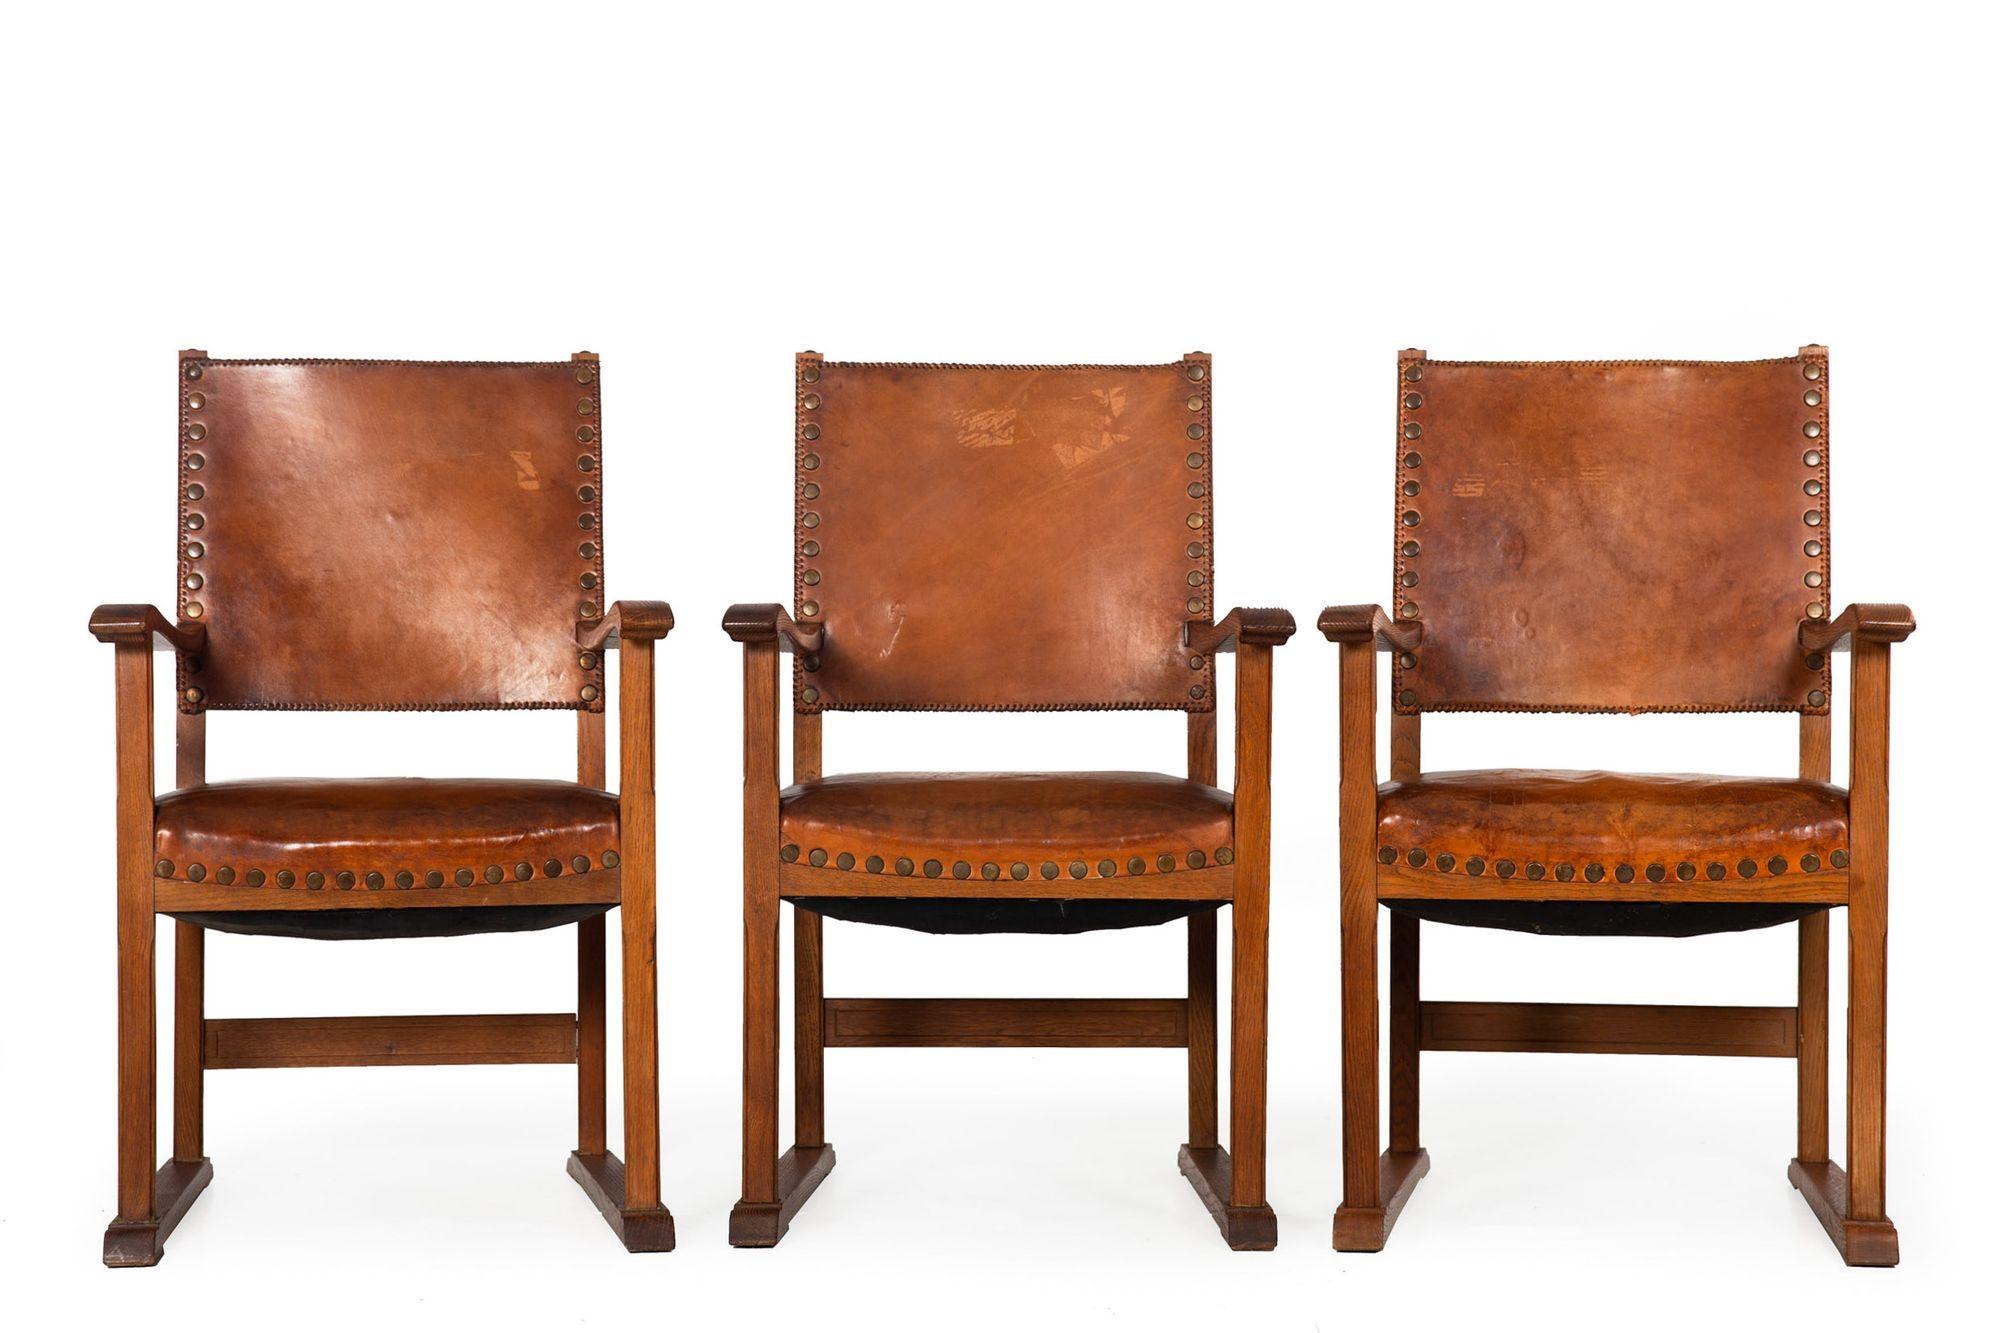 SET OF SIX FRENCH OAK AND COGNAC STITCHED-AND-STUDDED LEATHER DINING CHAIRS
Circa early 20th century
Item #308ZOL16P

A rich and wonderful set of six dining chairs, they feature wonderful solid oak frames with heavy patinated leather upholstery. The